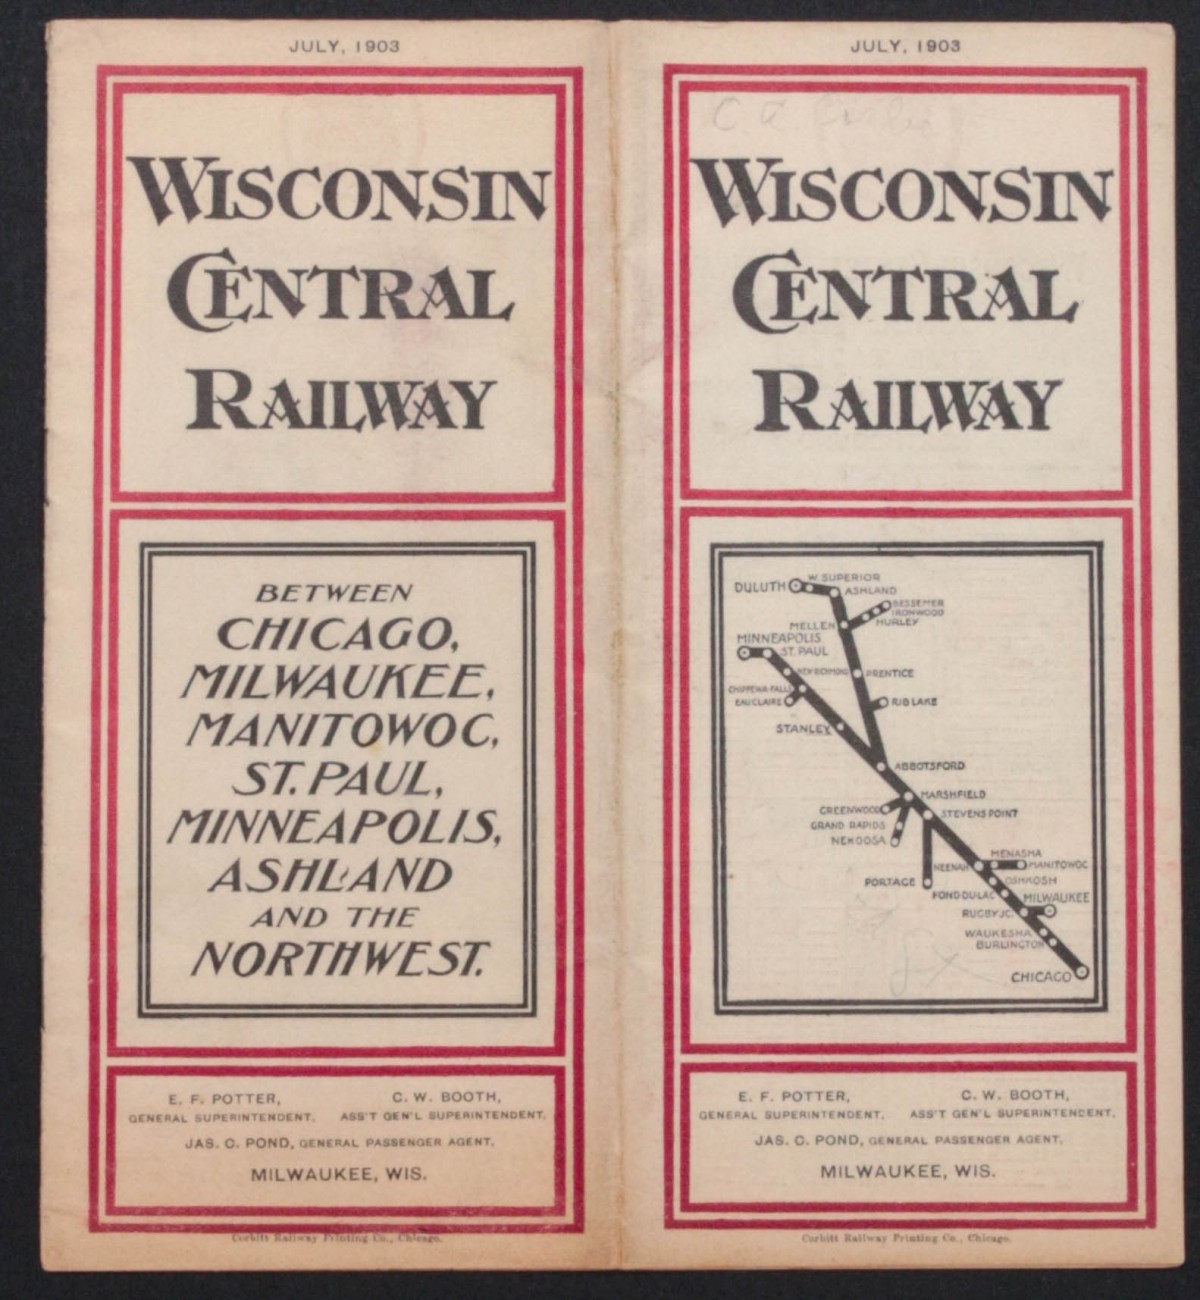 WISCONSIN CENTRAL RY TIMETABLE FOR JULY 1903